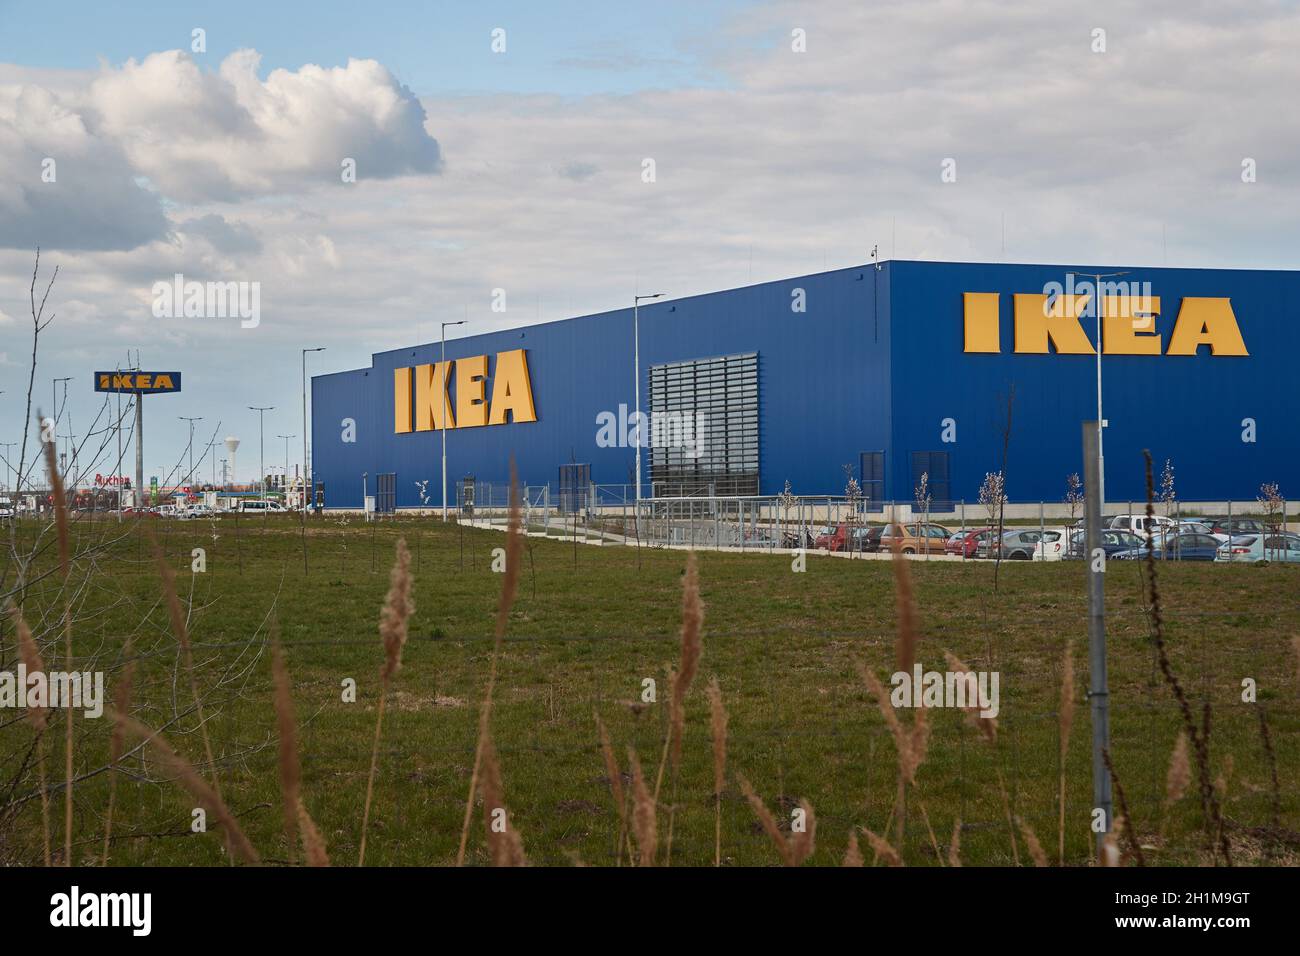 BUDAPEST, HUNGARY - MARCH 30, 2019: Sign of a big Ikea furniture store near  Soroksar, Budapest, cars in the parking lot Stock Photo - Alamy